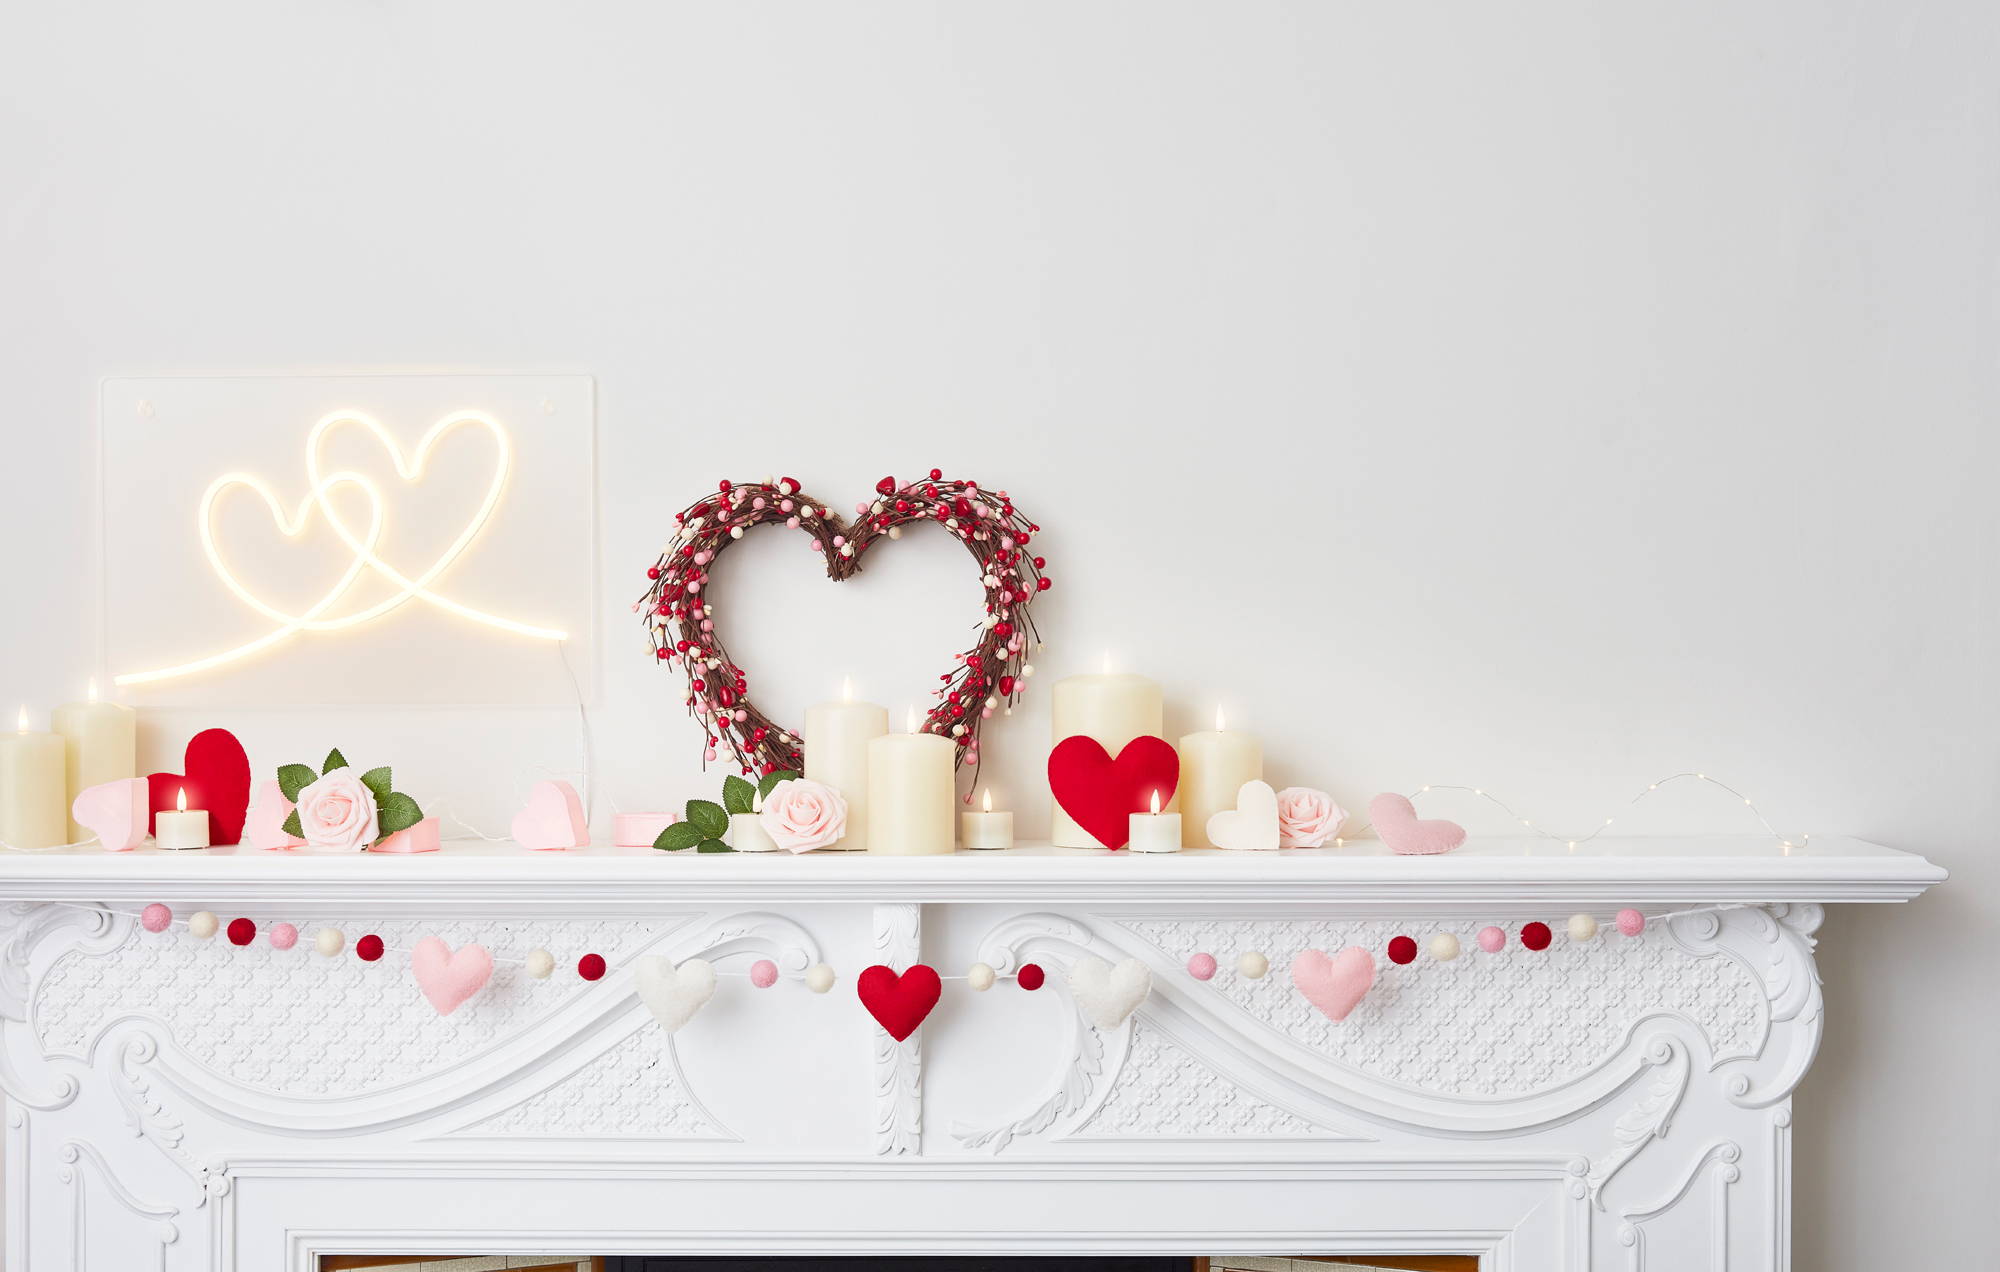 A white mantlepiece with a heart wreath, wall light, garland, felt decorations and candles.